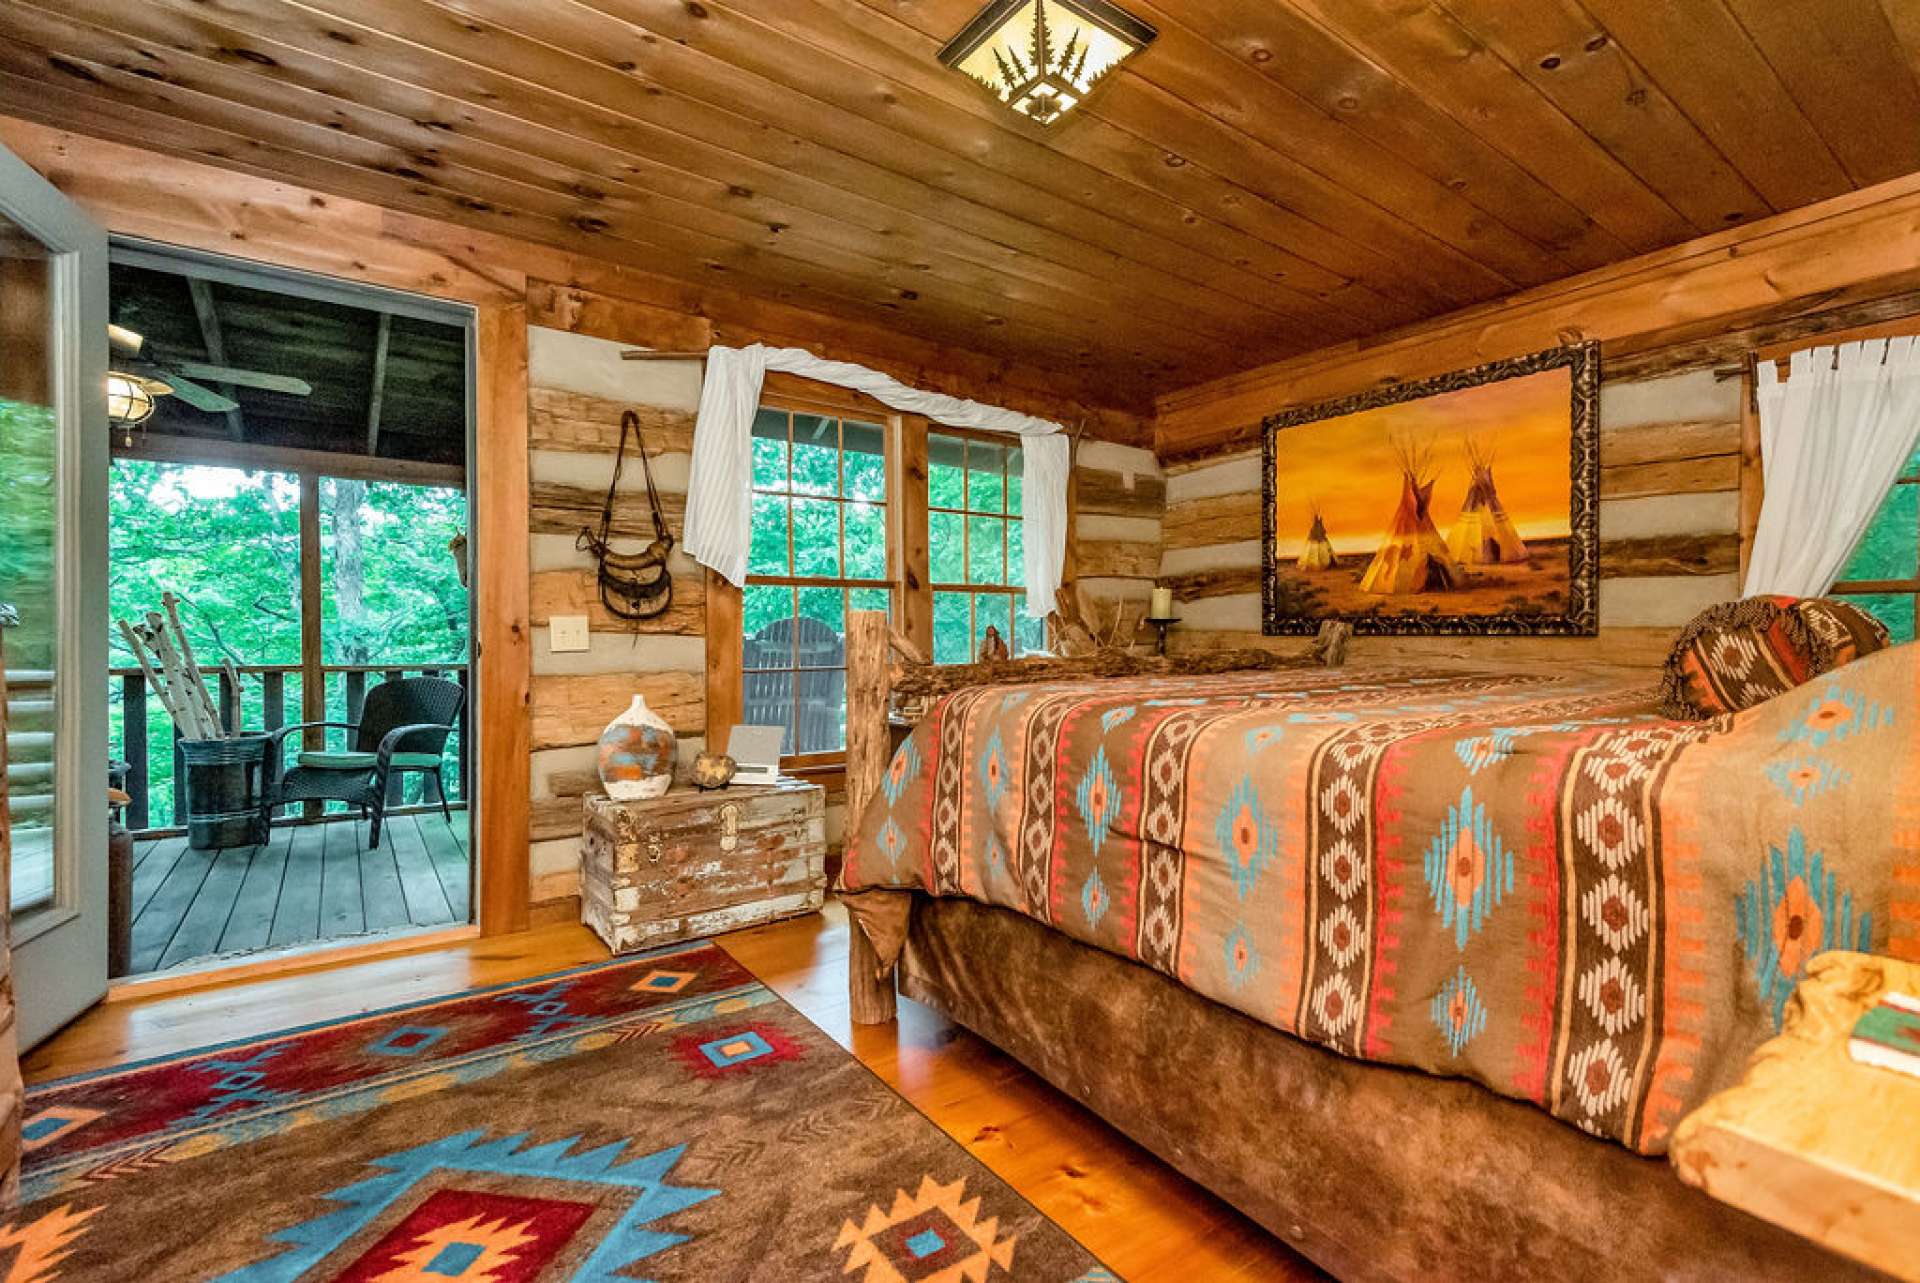 Spacious primary bedroom offers access to the screened in porch and back deck.